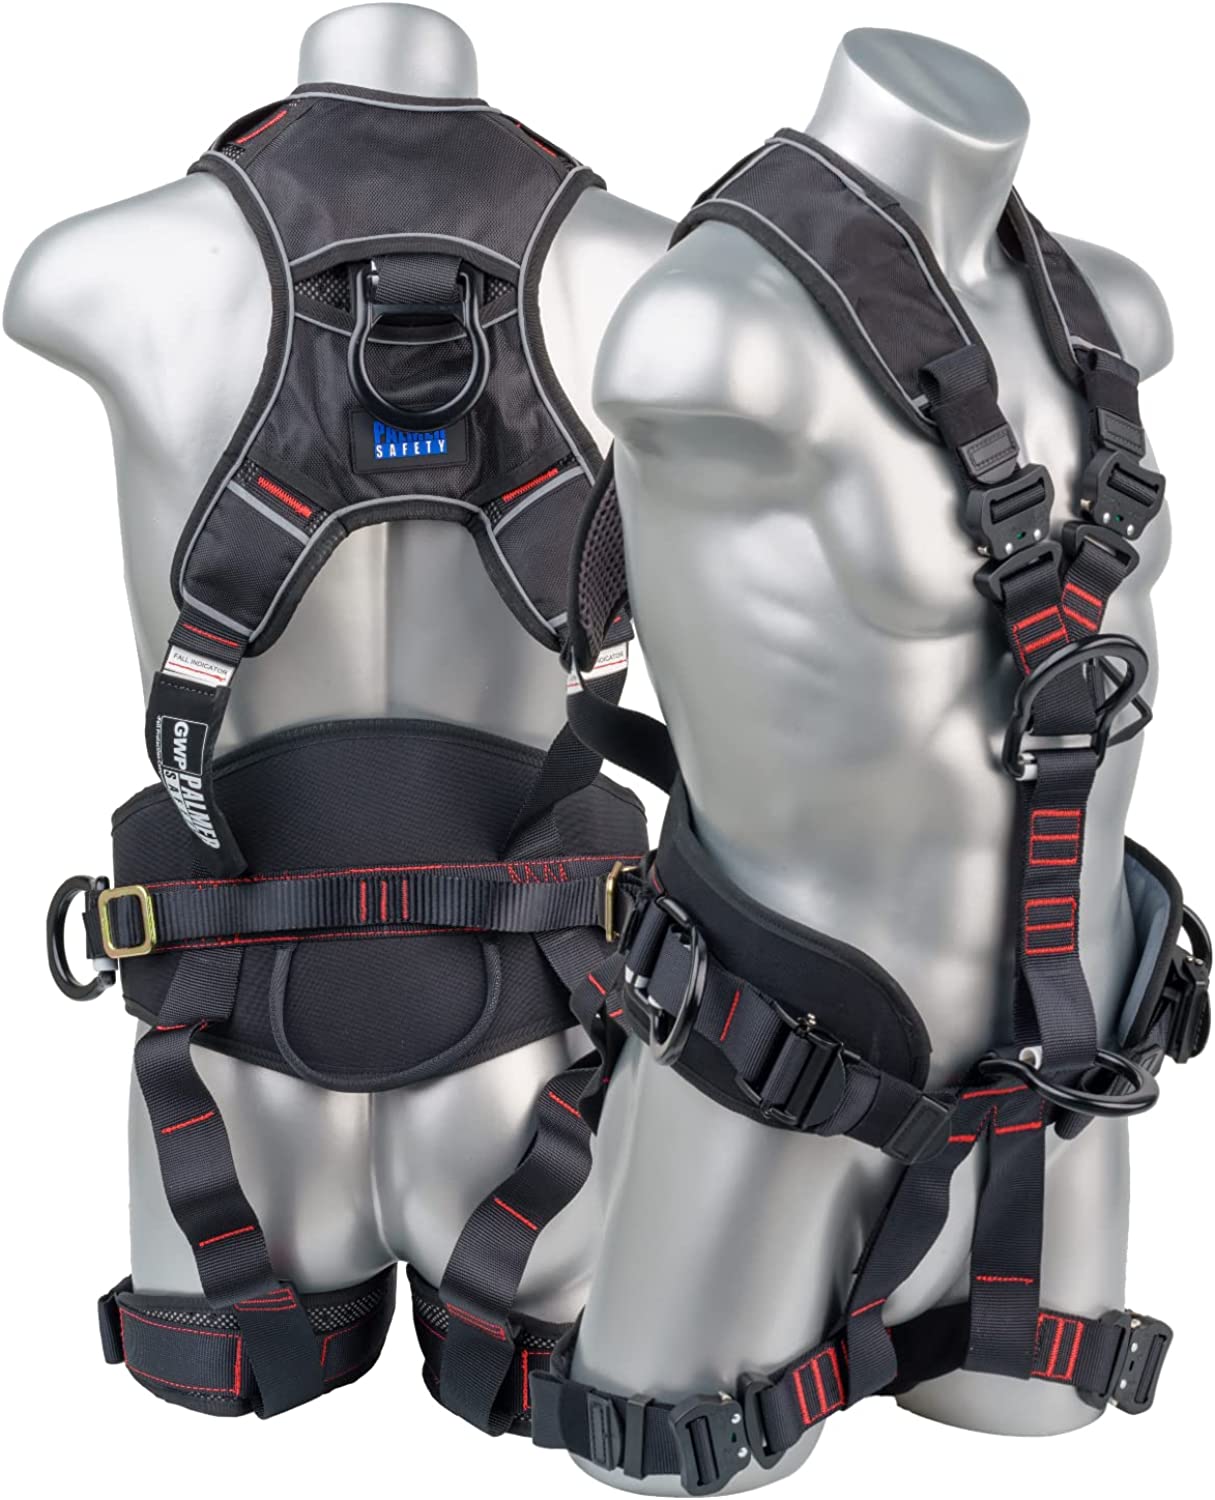 Palmer Safety H22312162 Full Body Rope Access/Rescue Safety Harness,  Aluminum D-Rings, QC Chest/Leg Straps, Back Padded